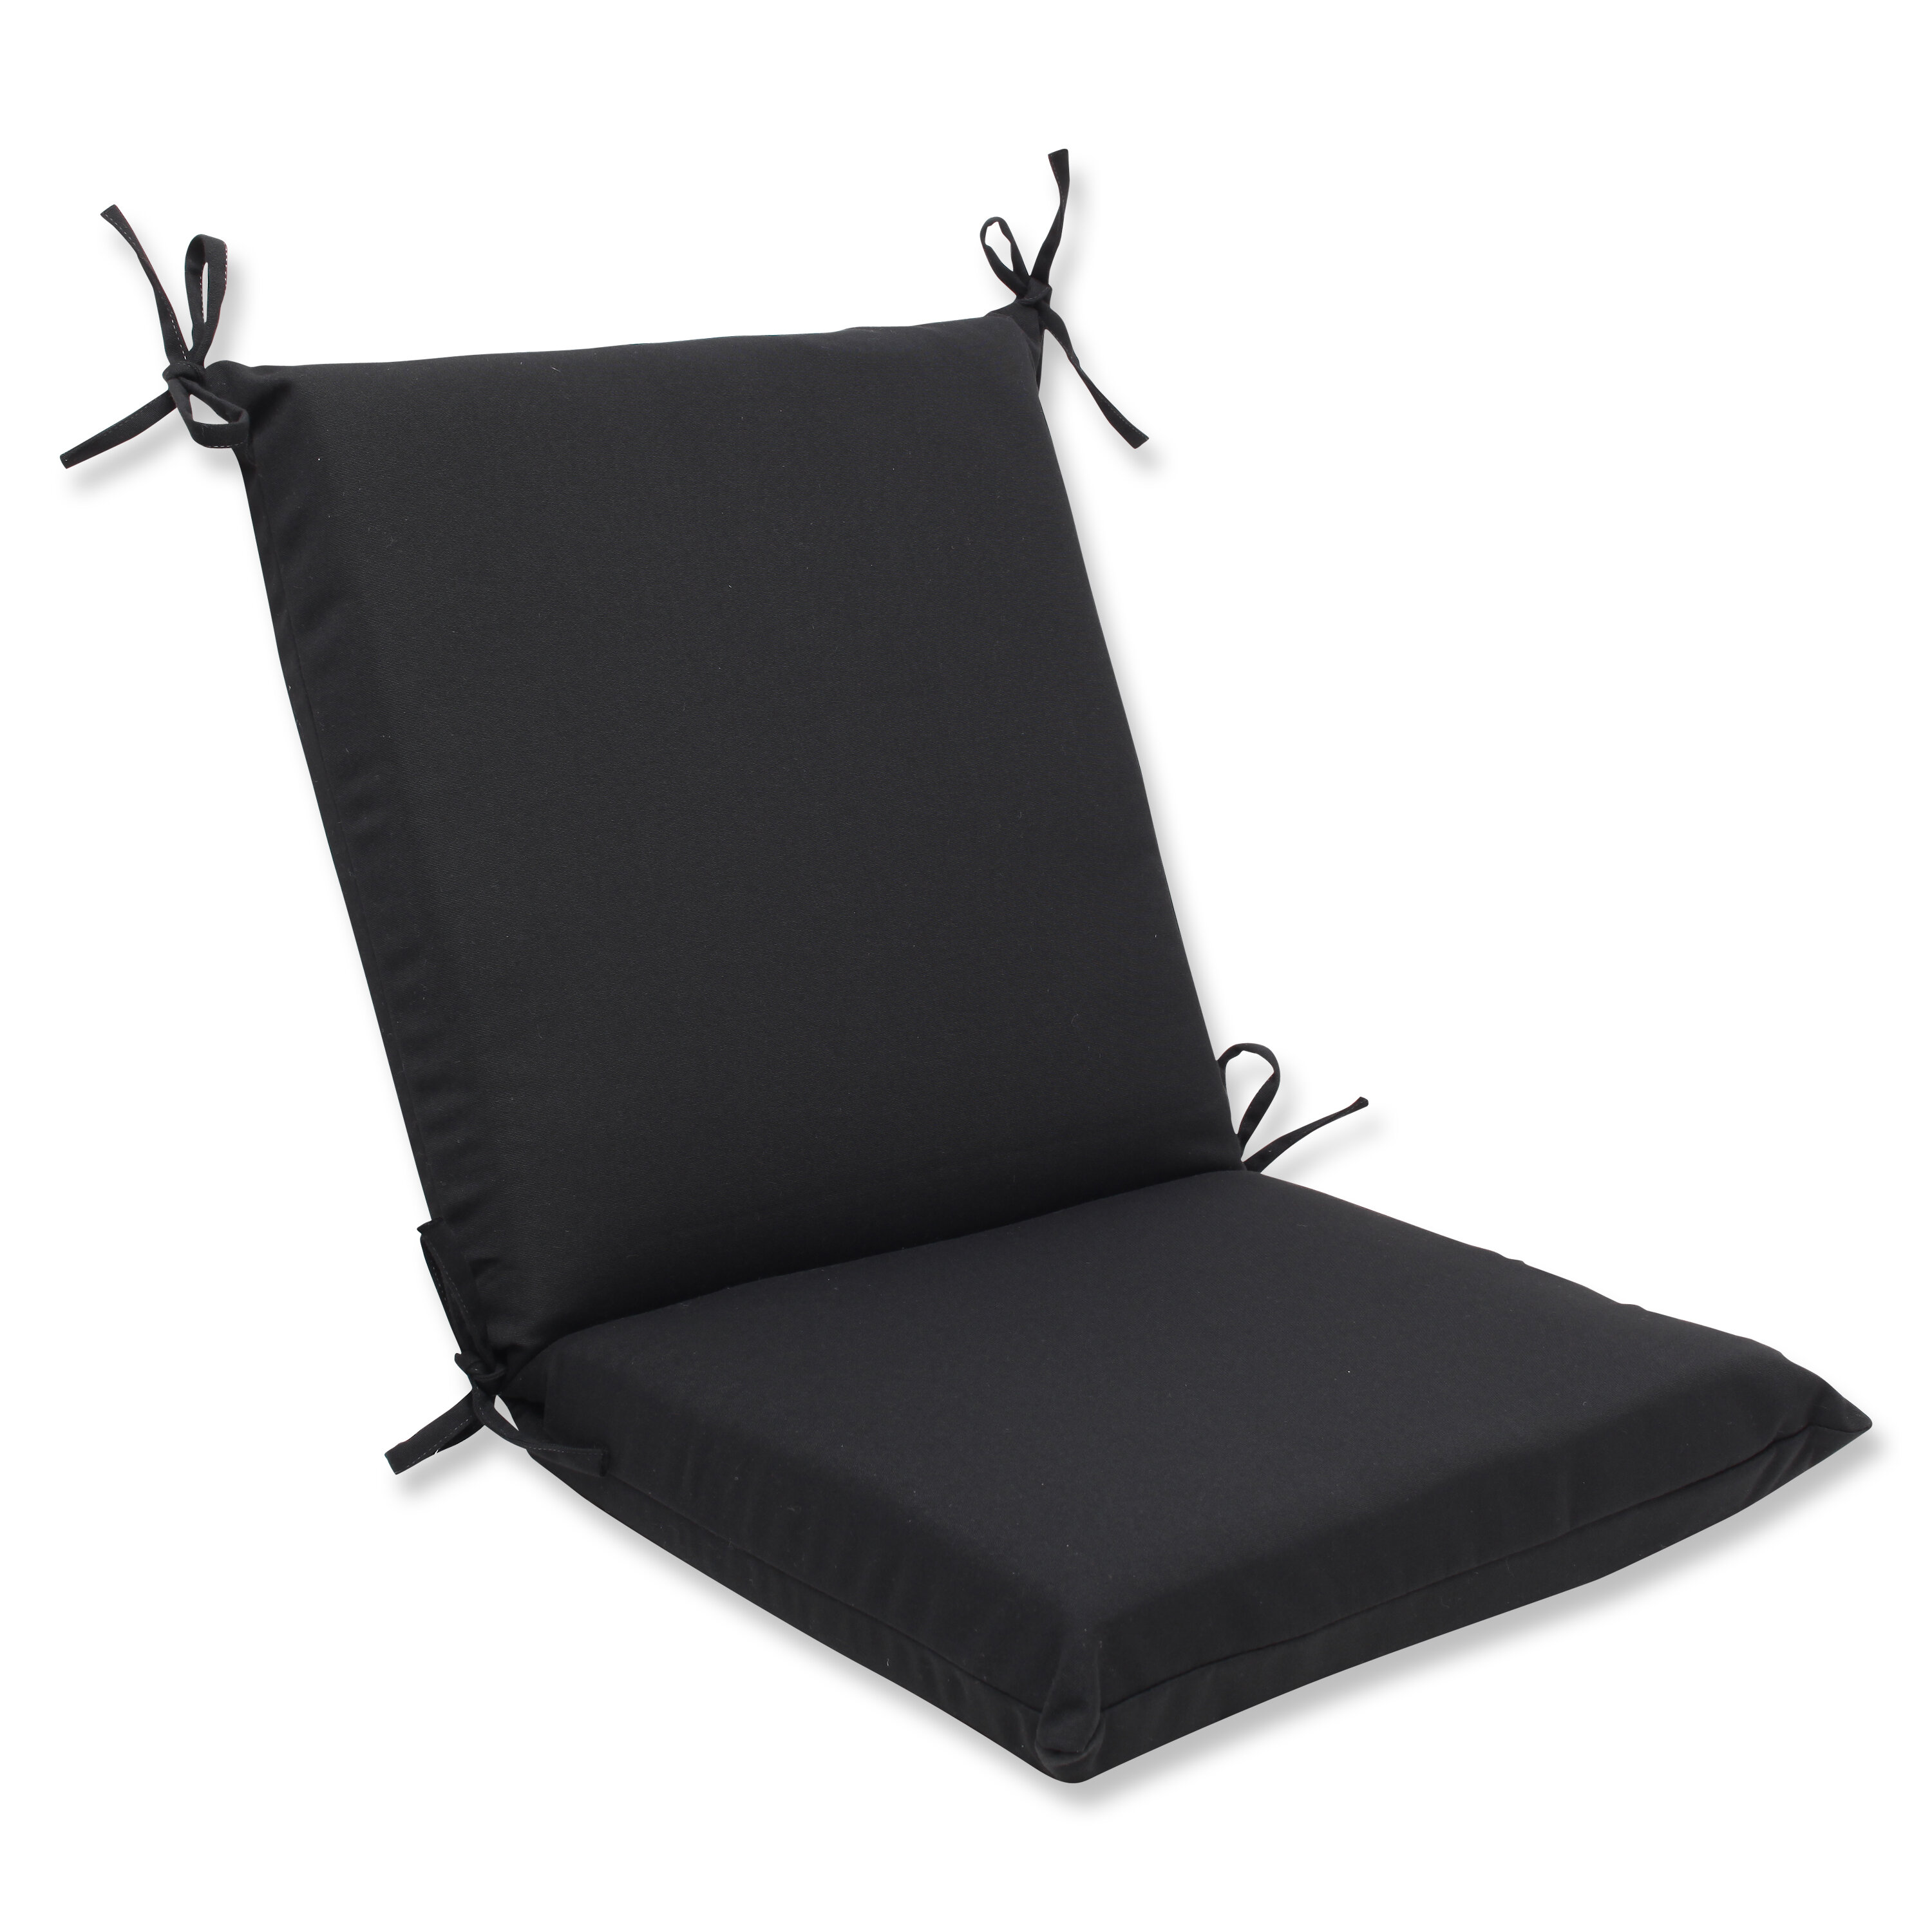 36.5 Solid Dark Gray Outdoor Patio Squared Chair Cushion with Ties 